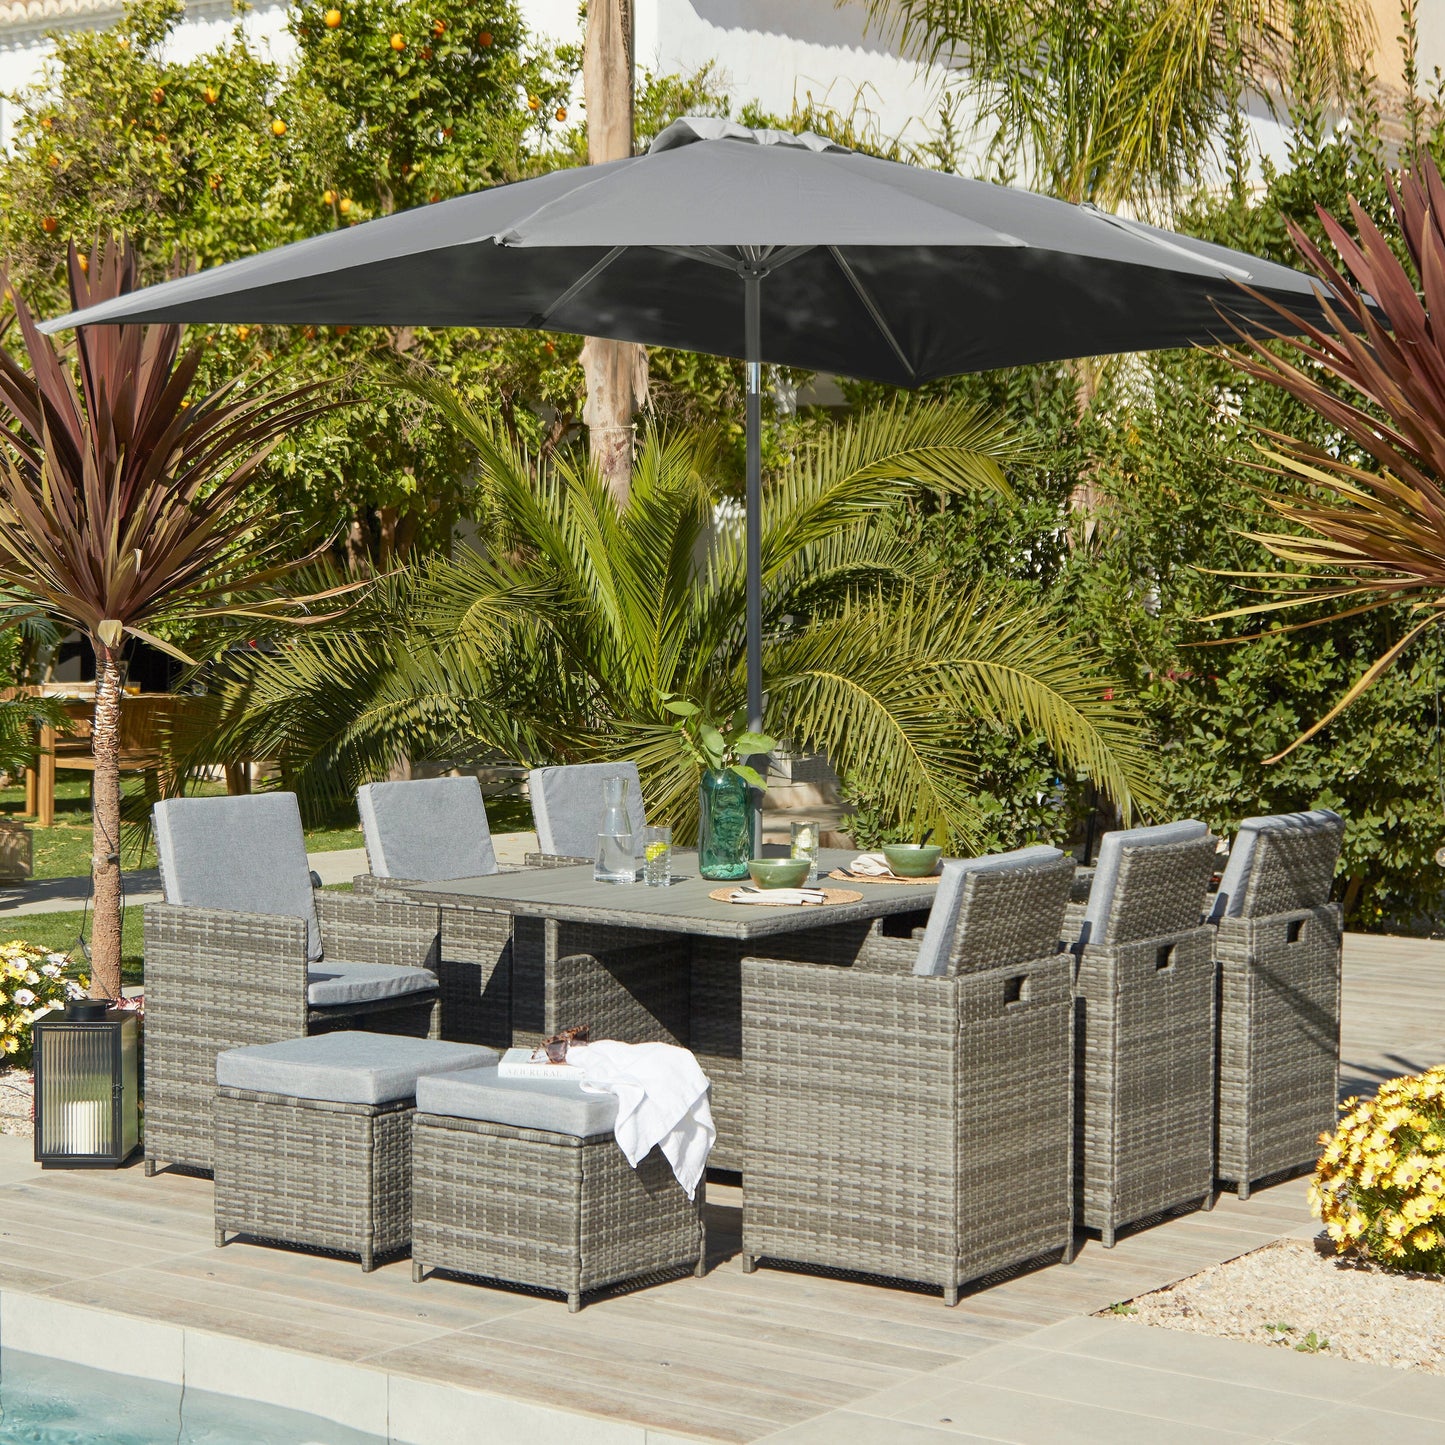 10 Seater Rattan Cube Garden Dining Set with Grey Parasol - Grey Weave Polywood Top